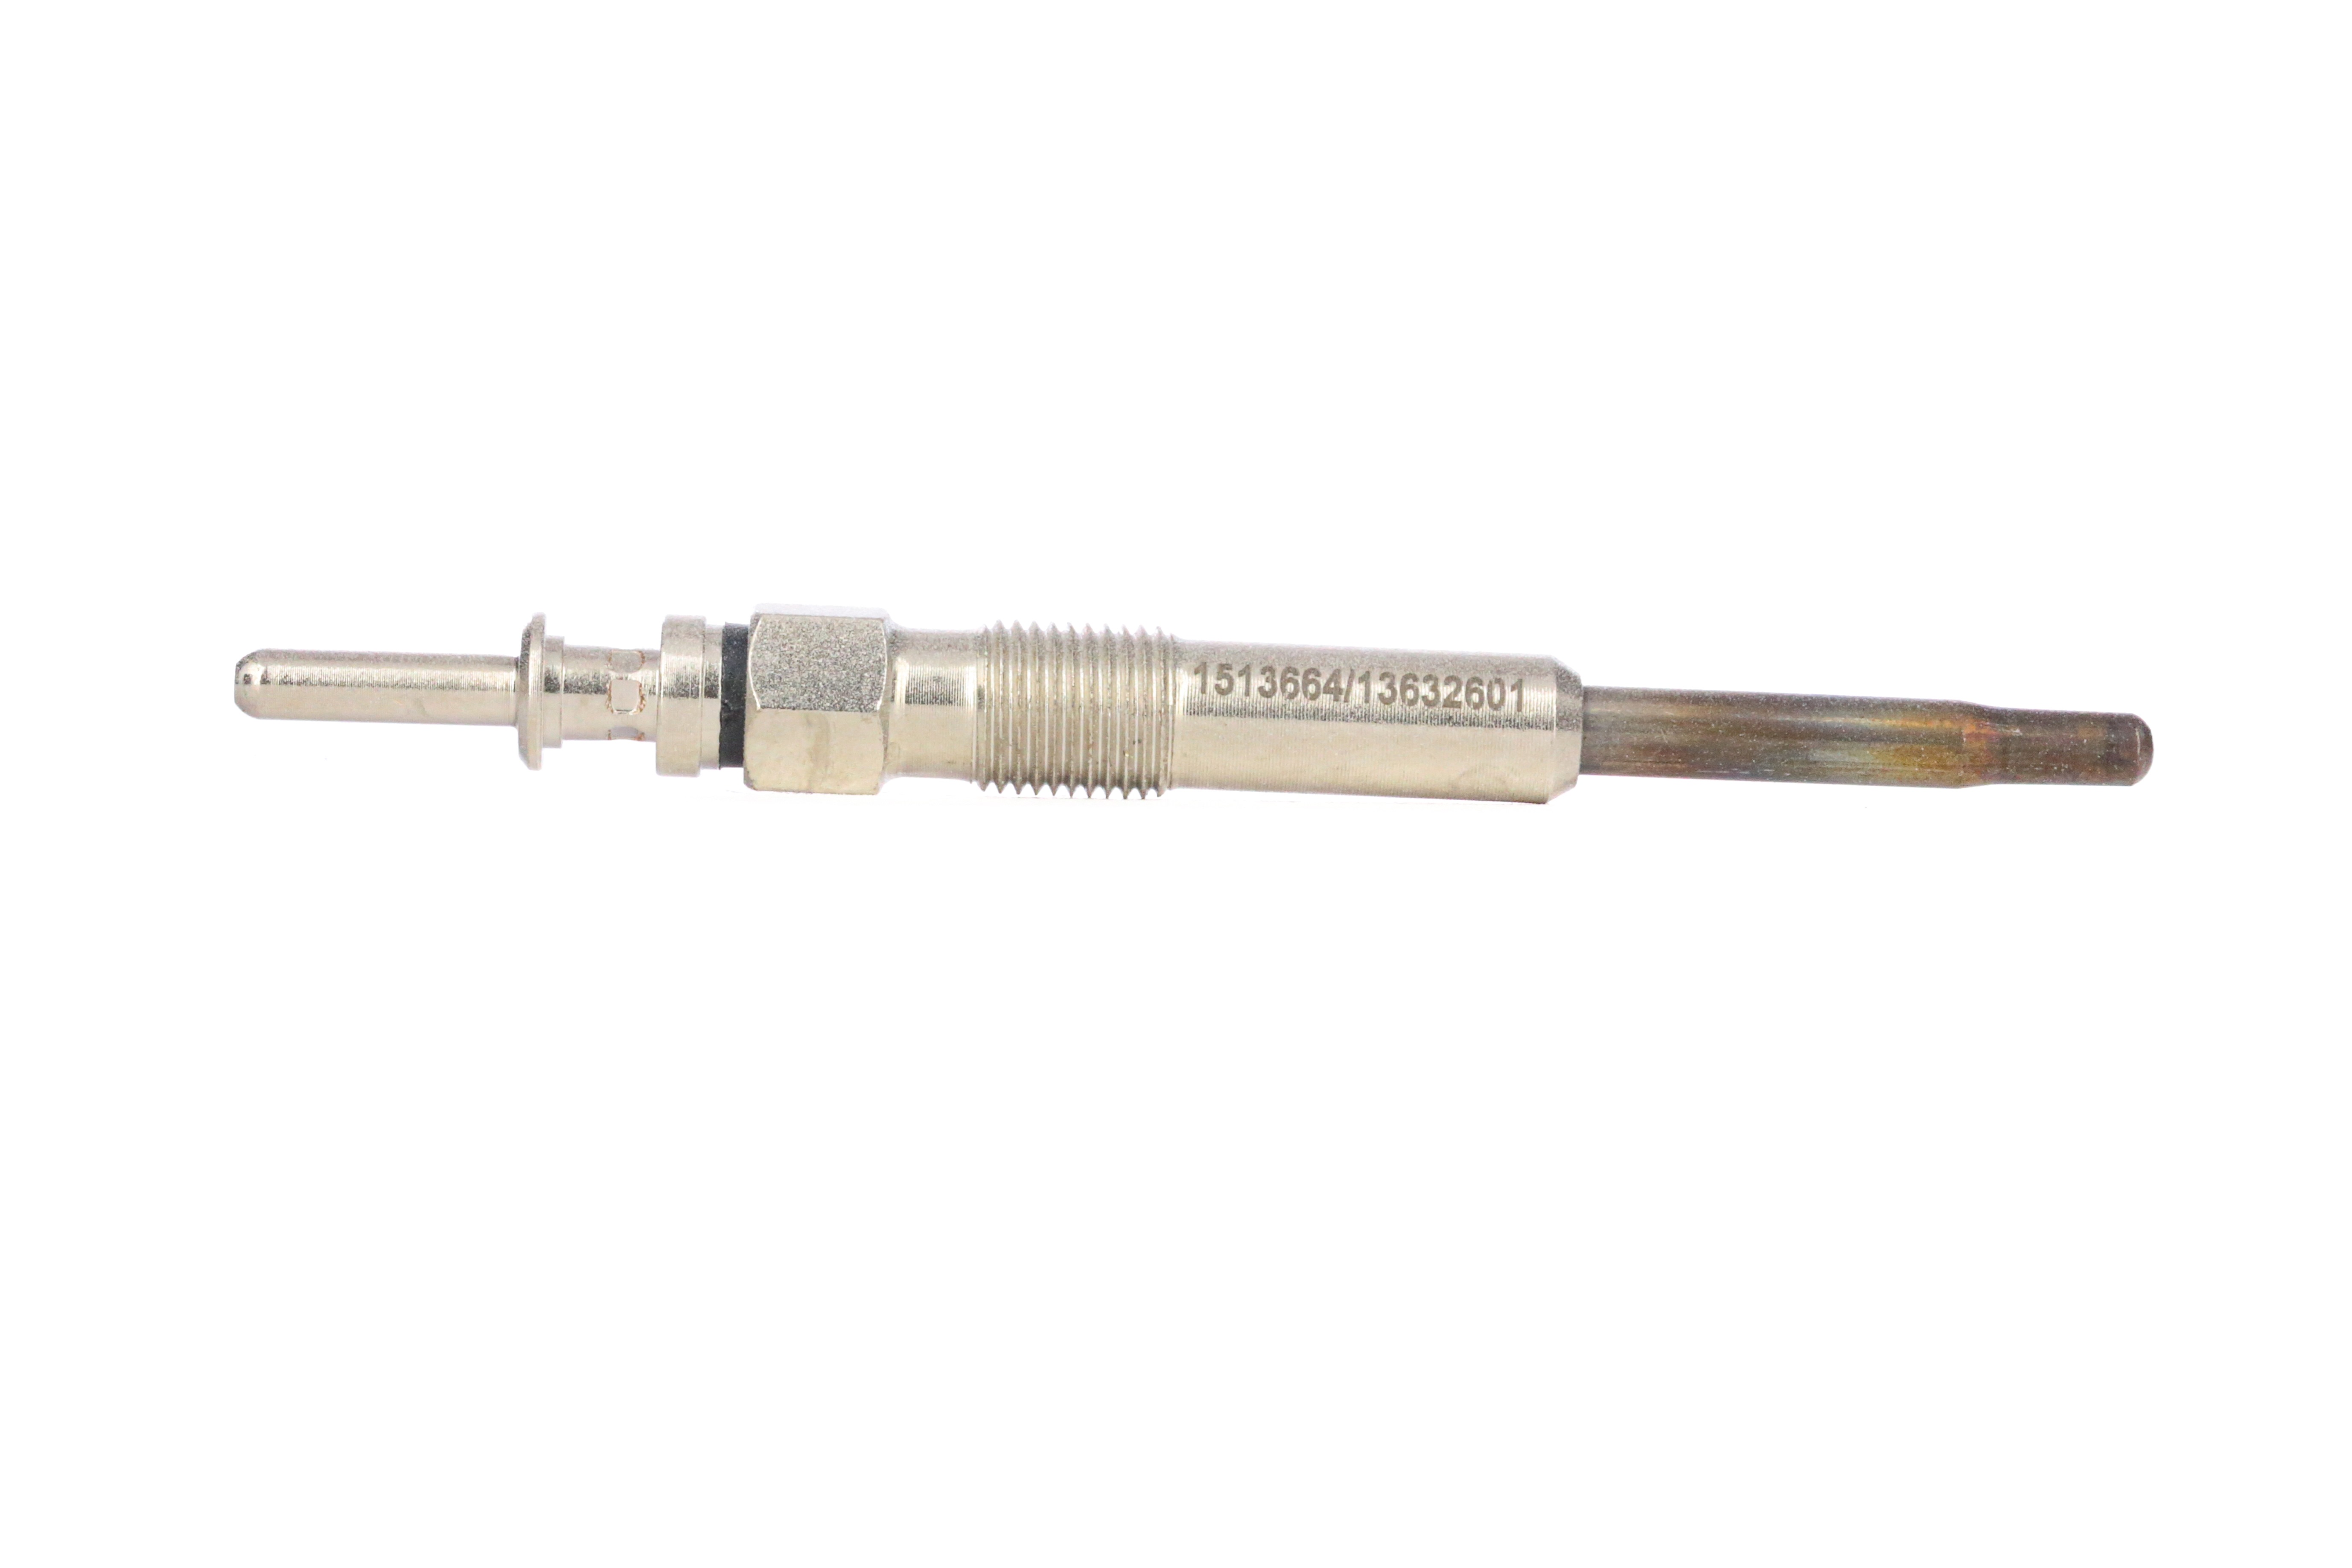 RIDEX 11V M10 x 1, after-glow capable, Pencil-type Glow Plug, 107 mm Total Length: 107mm, Thread Size: M10 x 1 Glow plugs 243G0209 buy